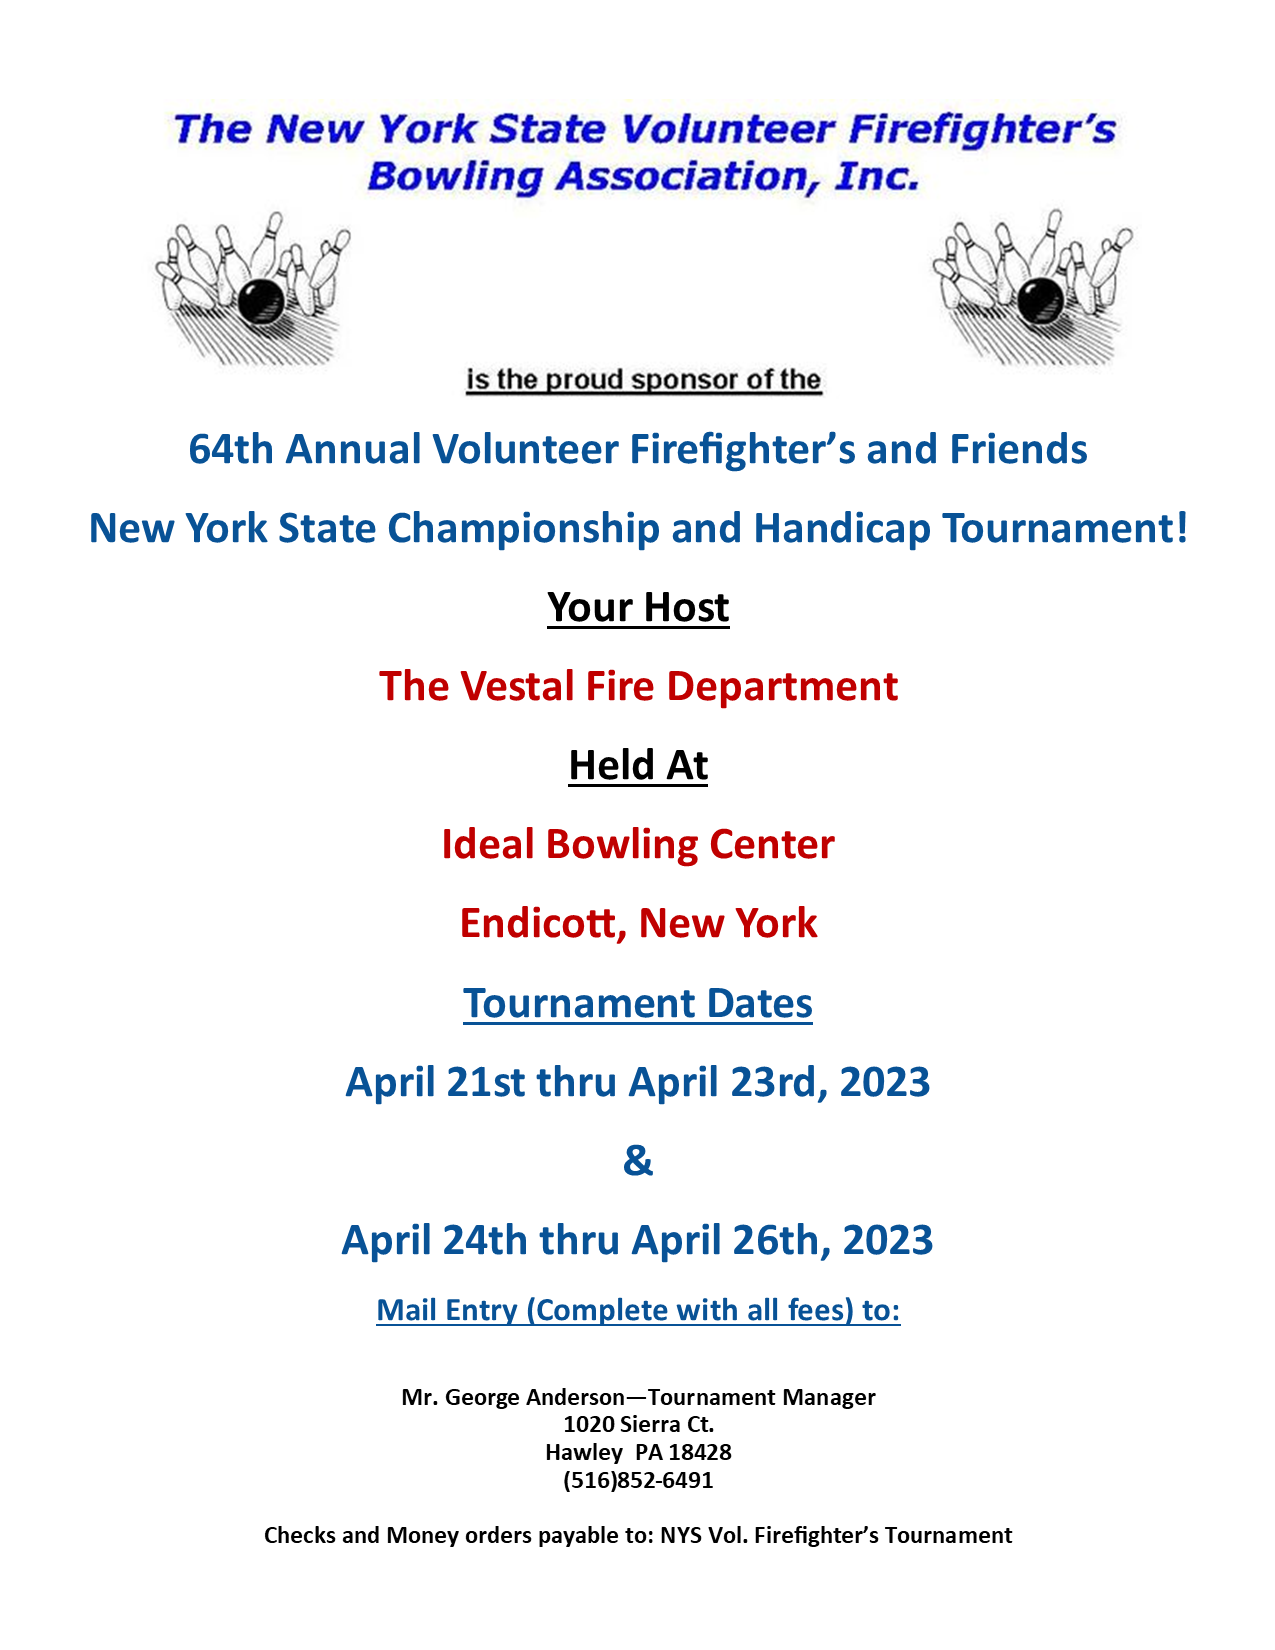 Vestal Fire Department hosting NYS Volunteer Firefighters’ Bowling Tournament April 21-23 and 28-30